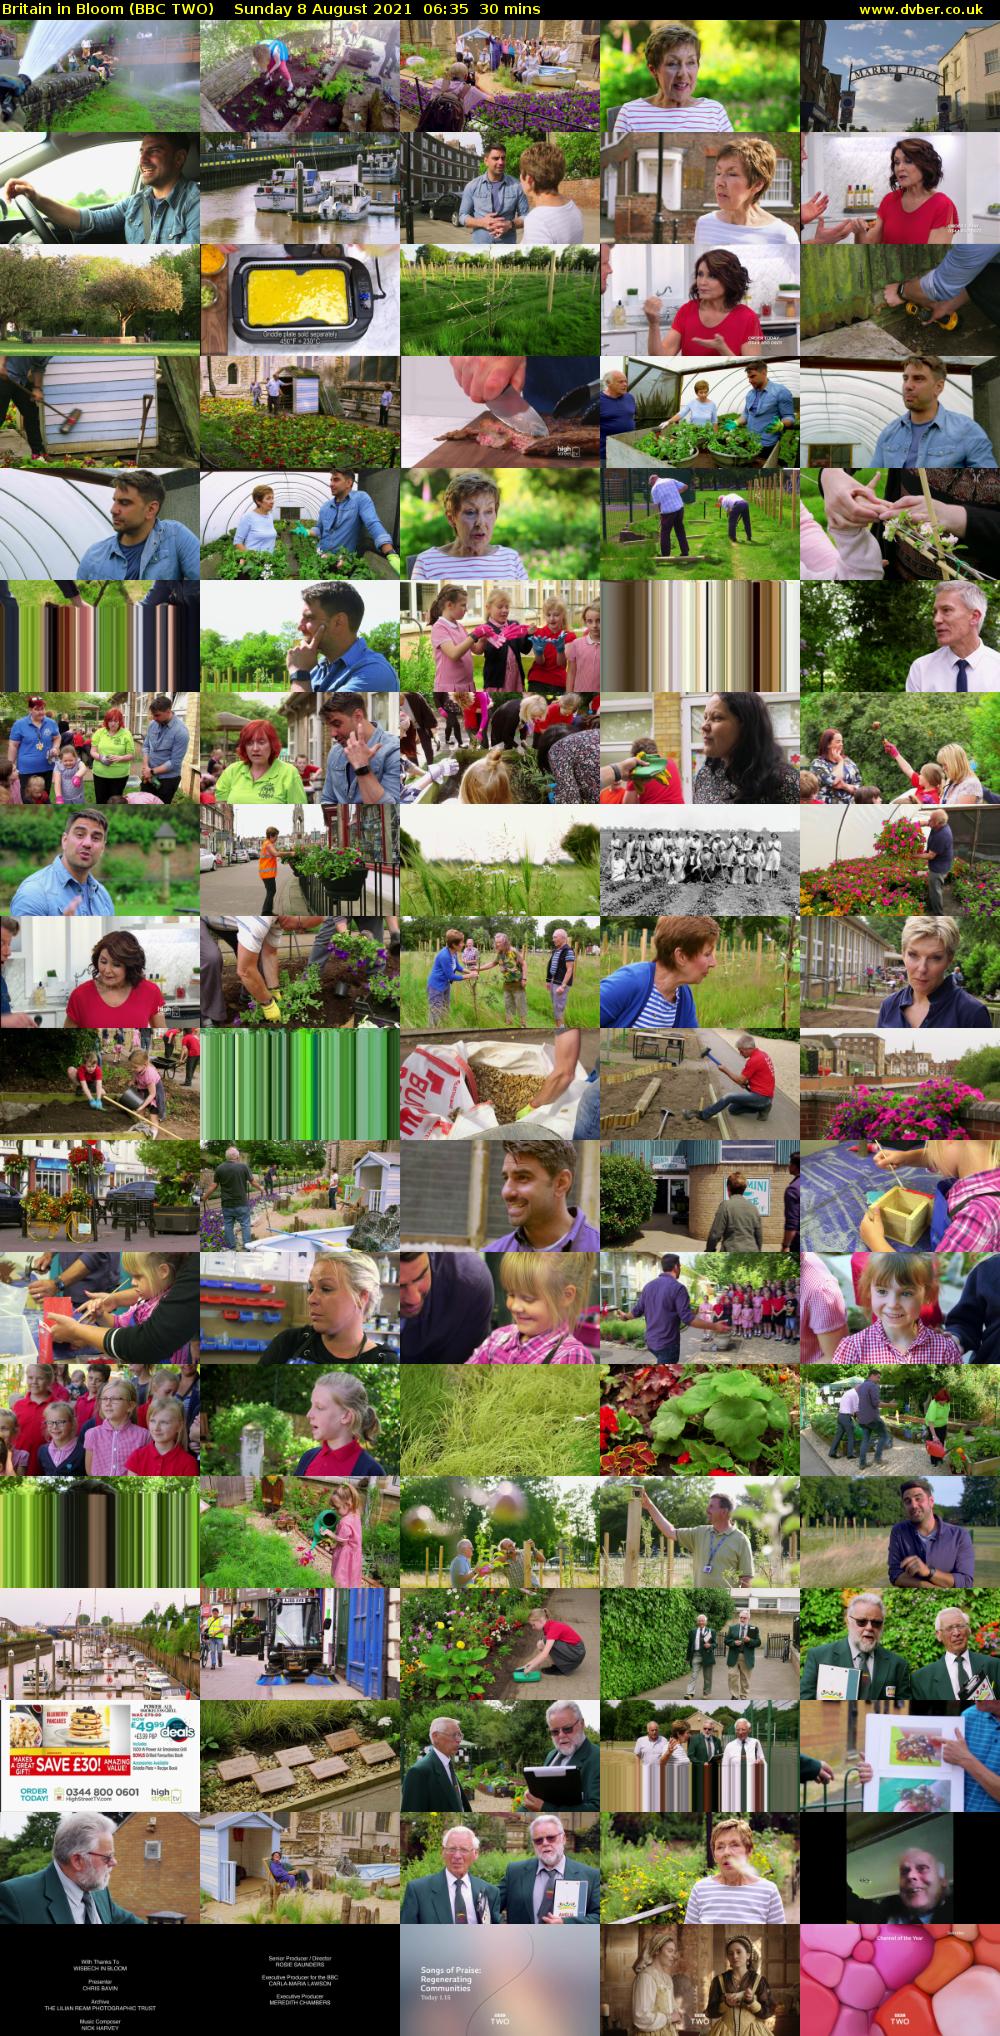 Britain in Bloom (BBC TWO) Sunday 8 August 2021 06:35 - 07:05